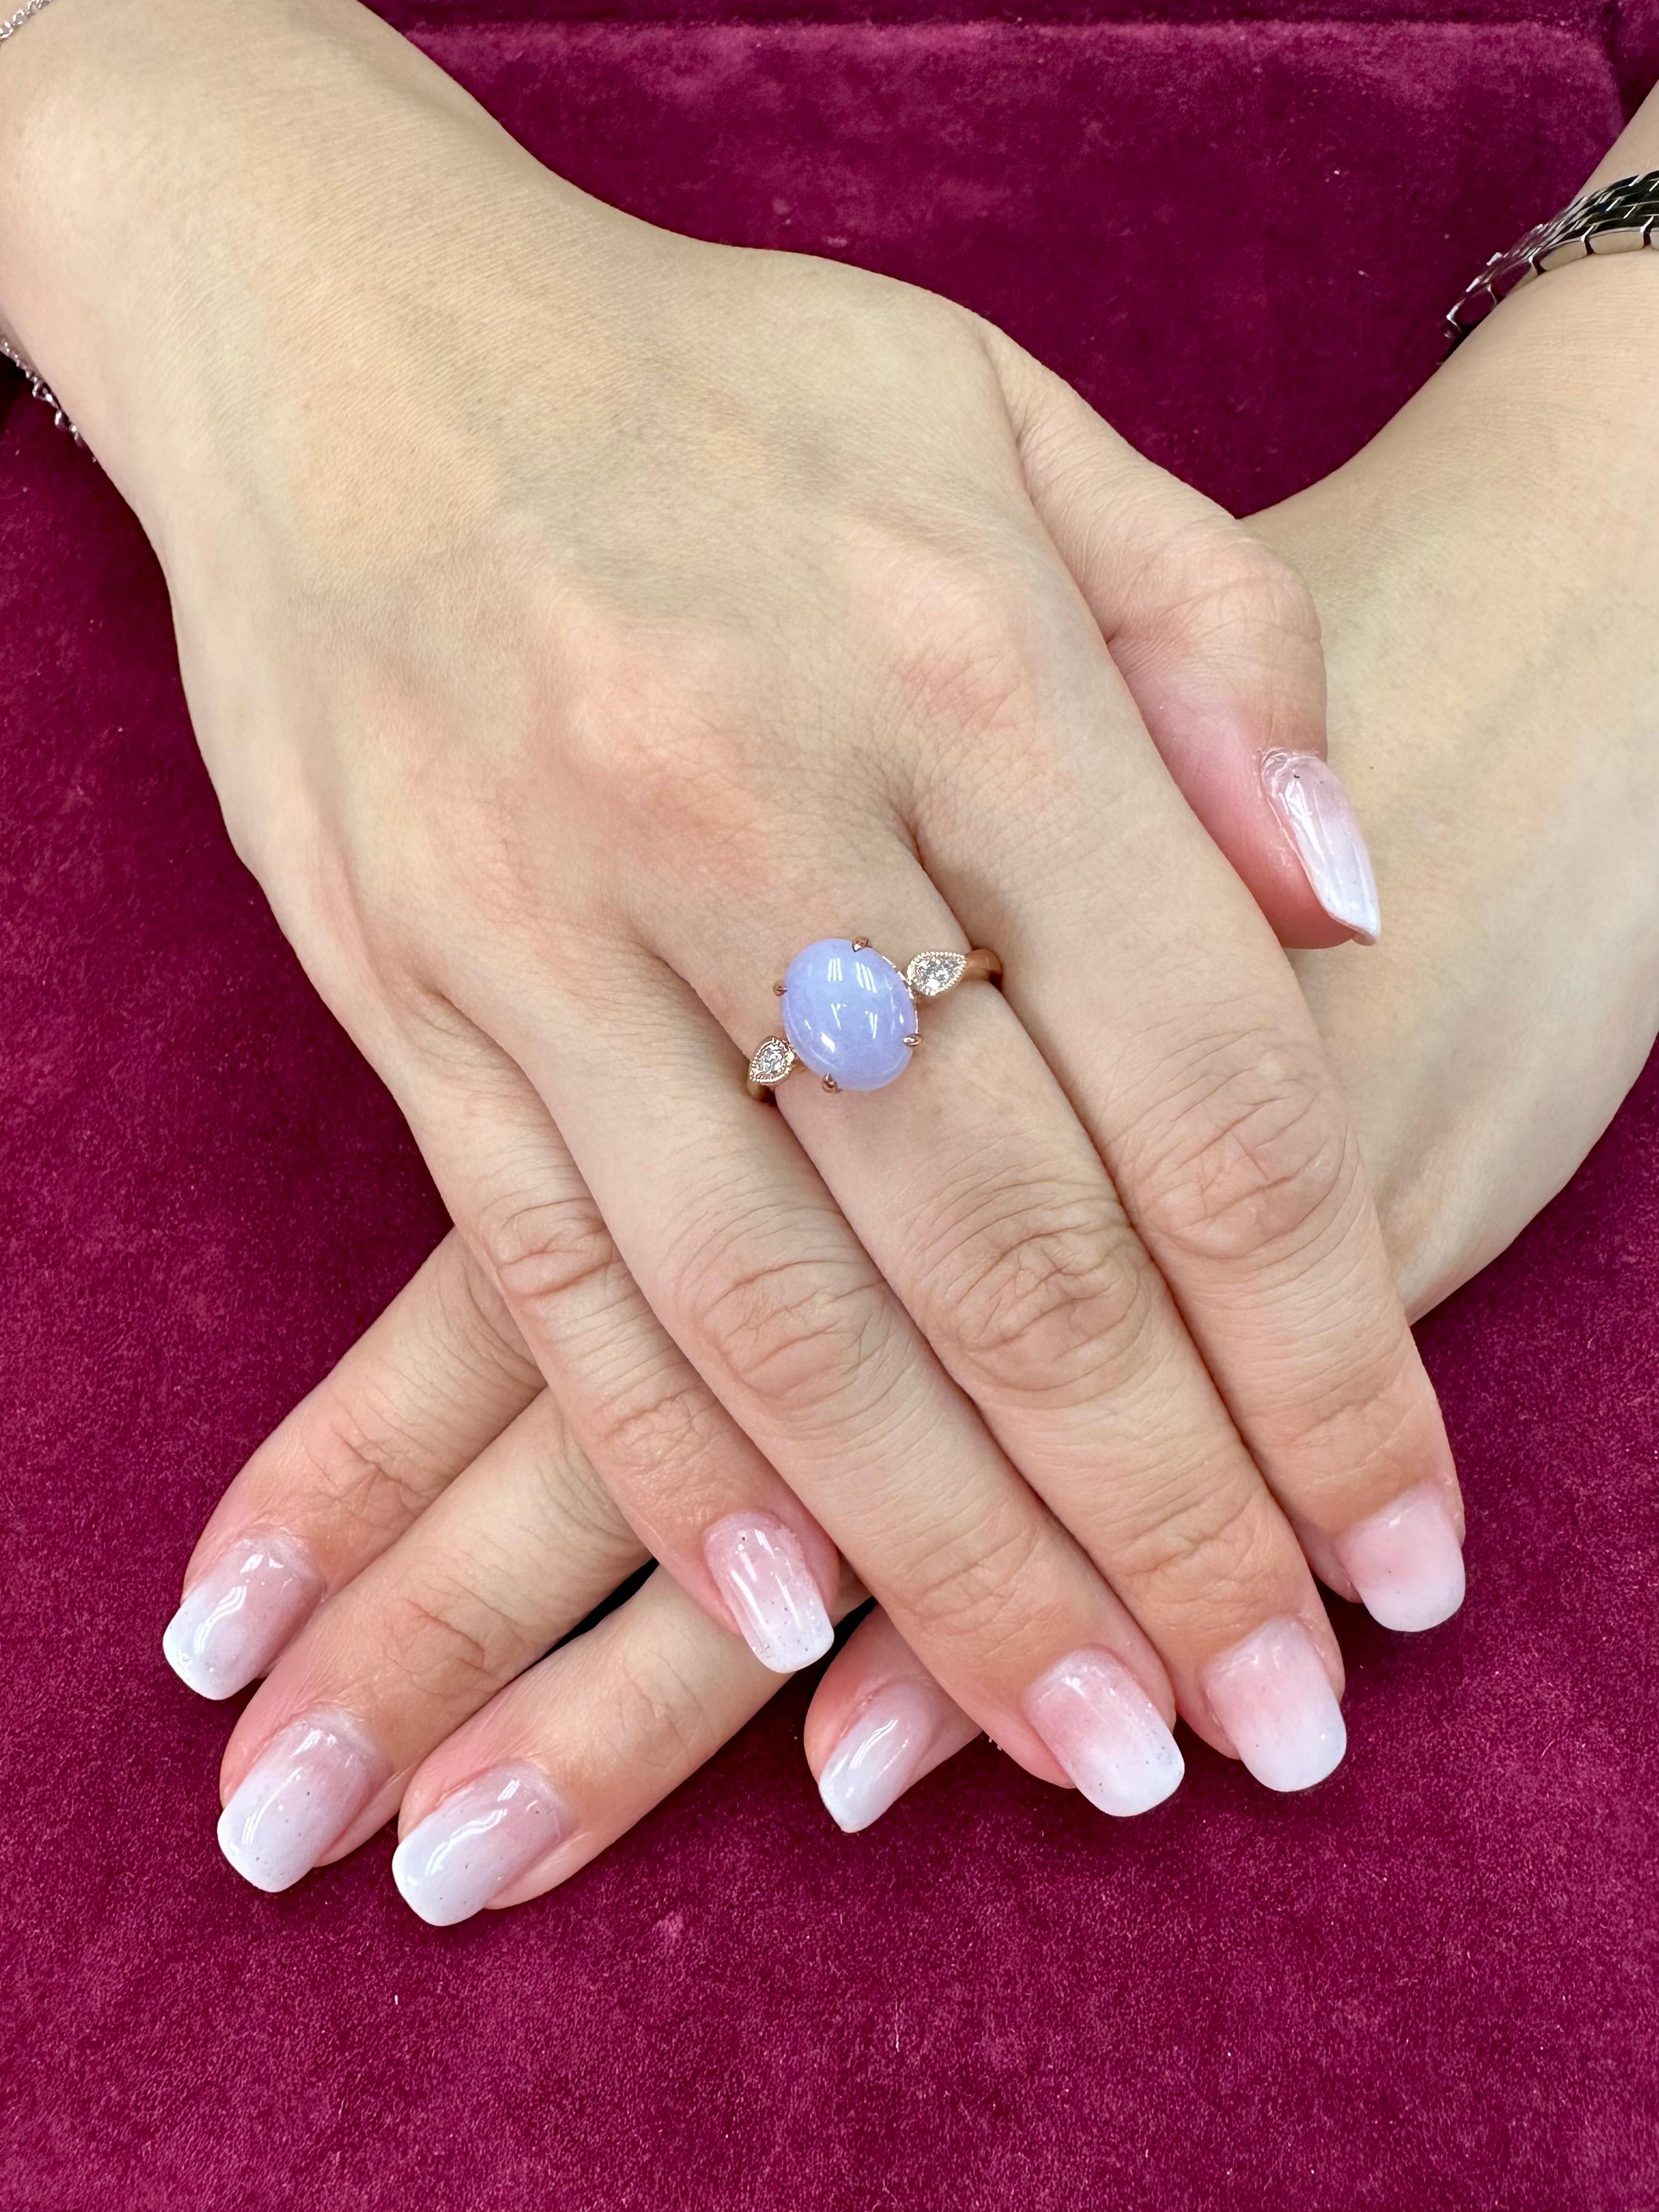 Please check out the HD Video! Here is a very eye pleasing lavender jade and diamond 3 stone ring! It is certified natural jadeite jade. The ring is set in 18k rose gold and diamonds. There are 2 pear shaped diamonds that are on each side of the